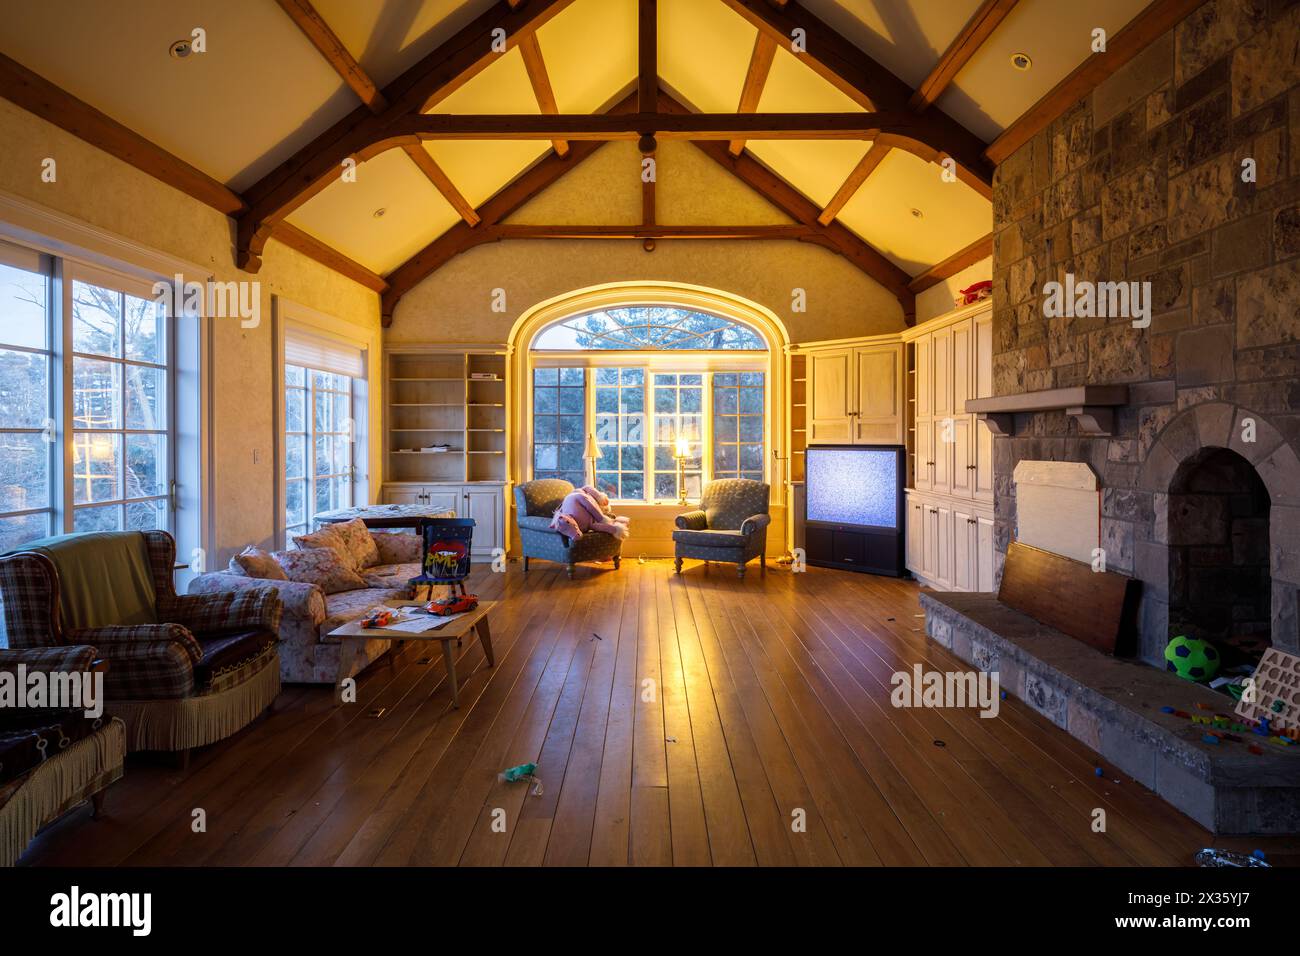 A living room with a cathedral ceiling and wooden joists and illuminated at dusk, inside an abandoned house. This House has since been demolished. Stock Photo